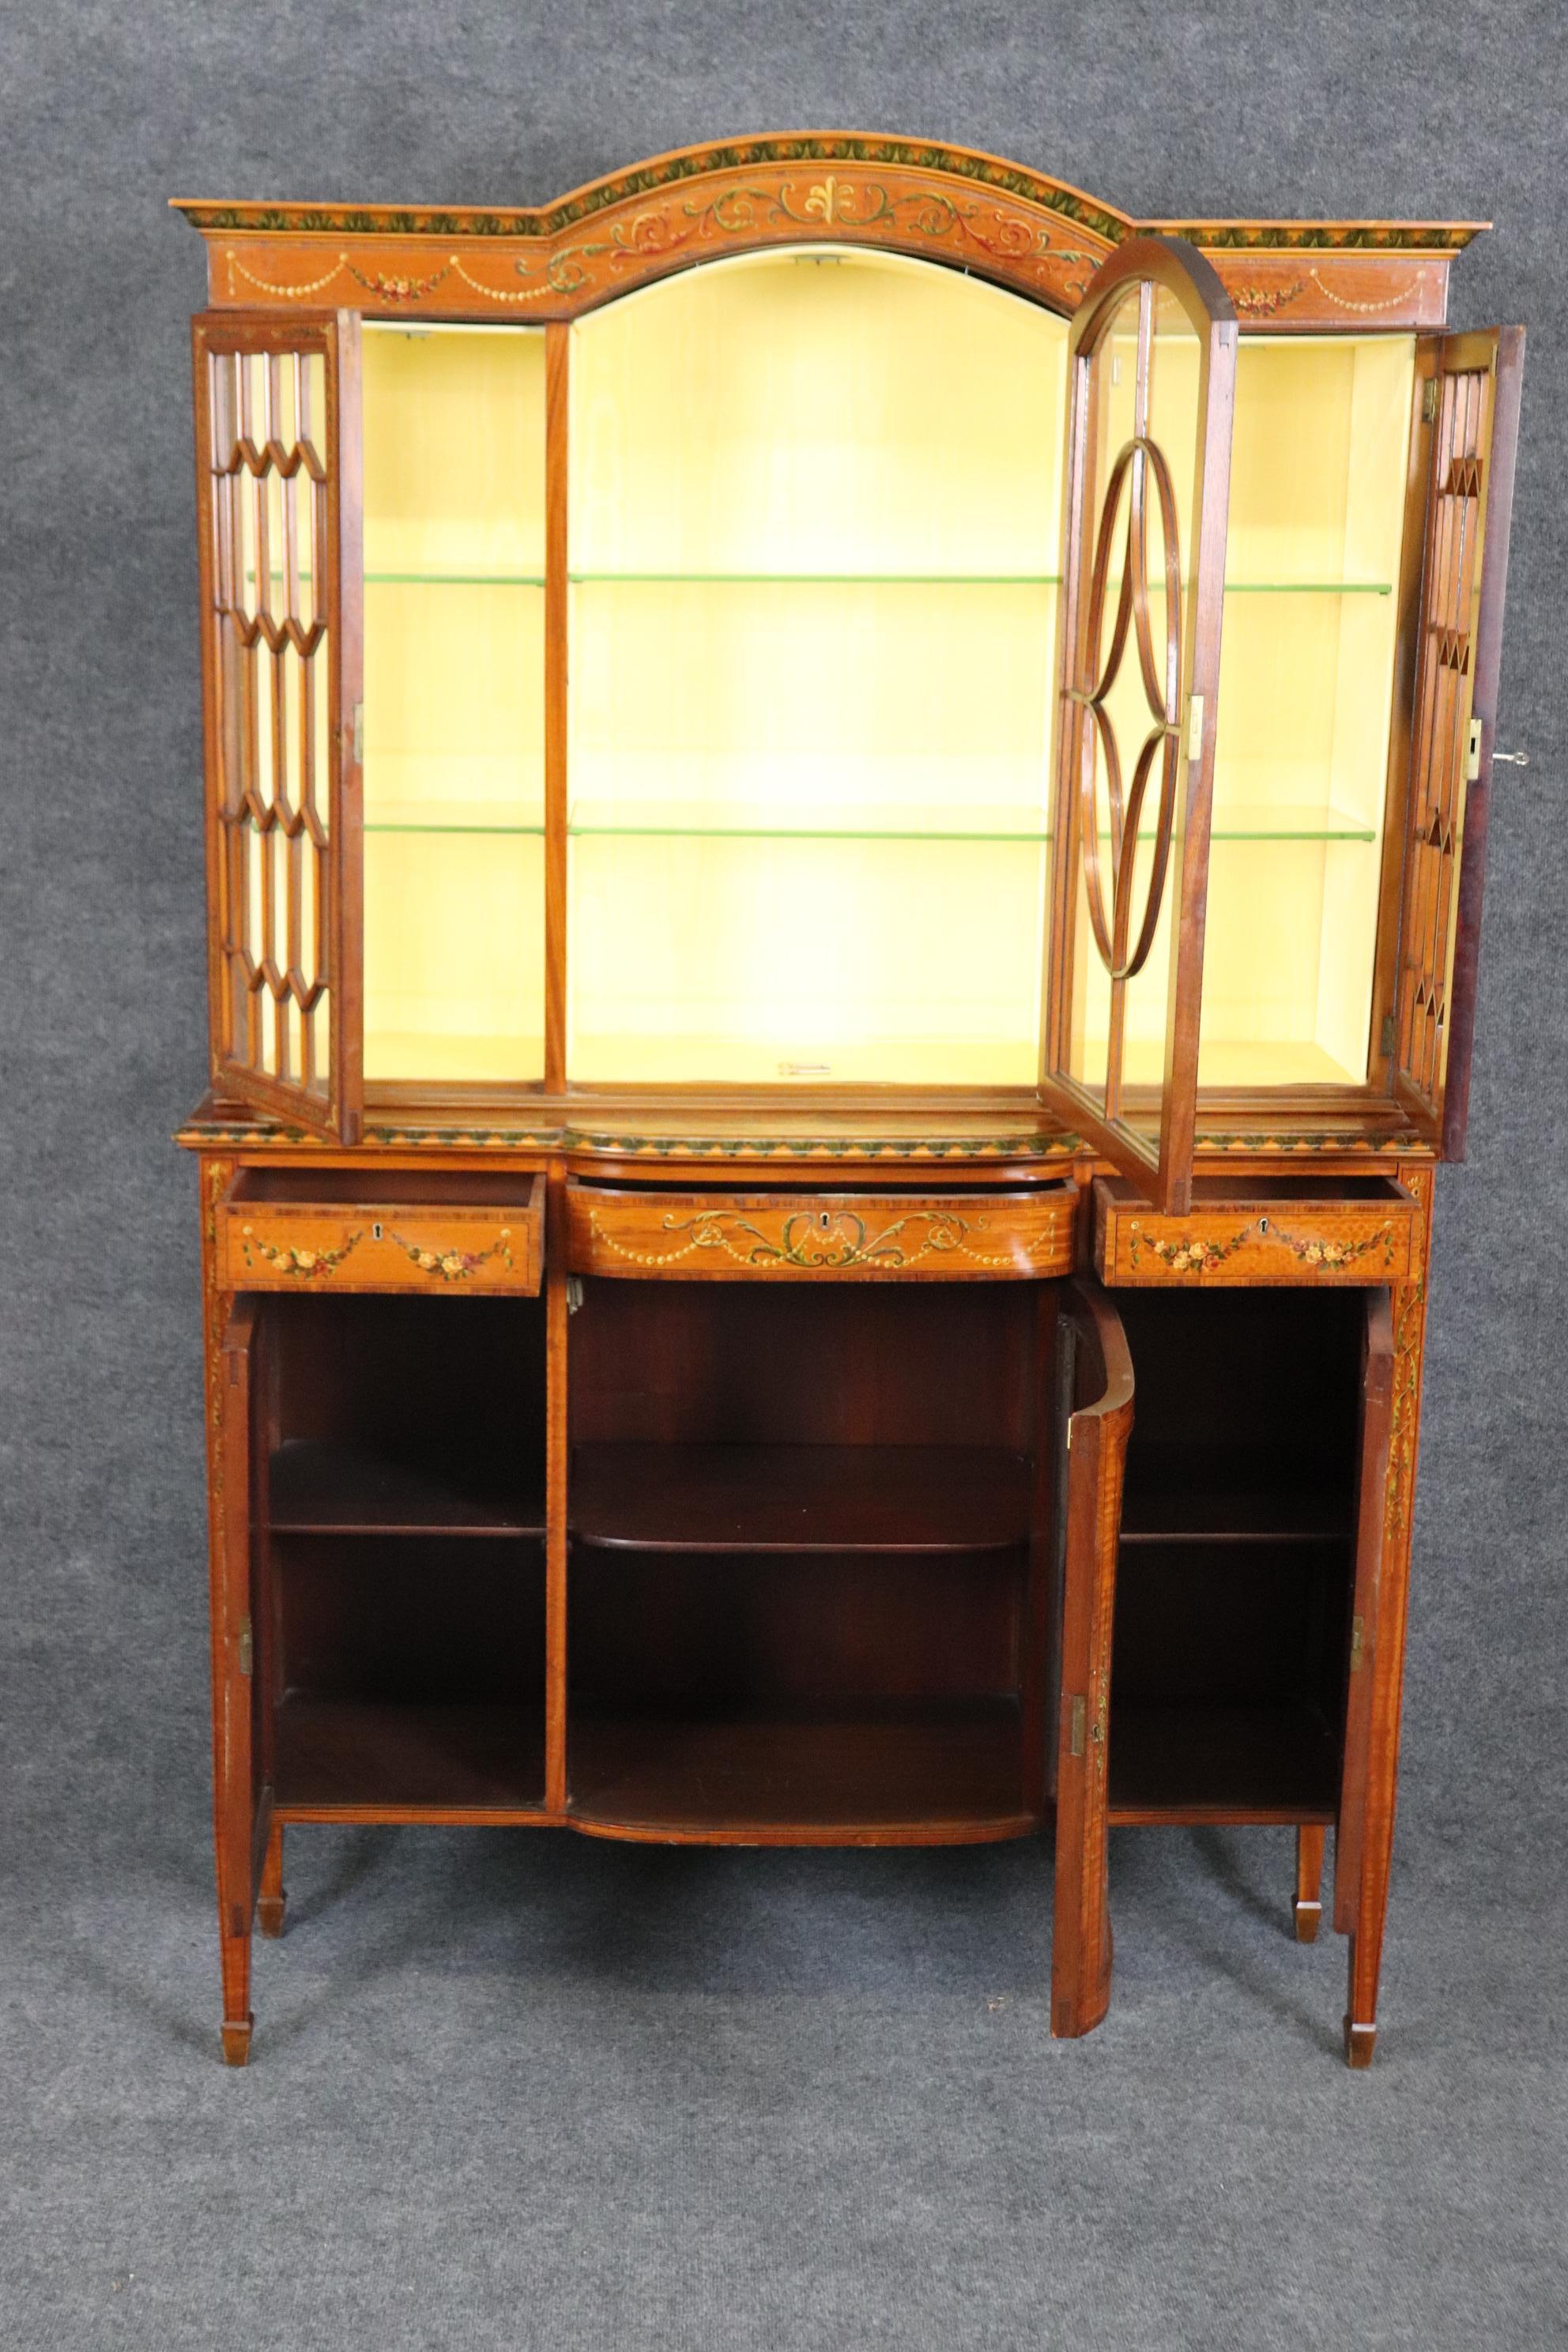 Early 20th Century Rare Satinwood Vernis Martin Paint Decorated Adams Style Vitrine China Cabinet For Sale